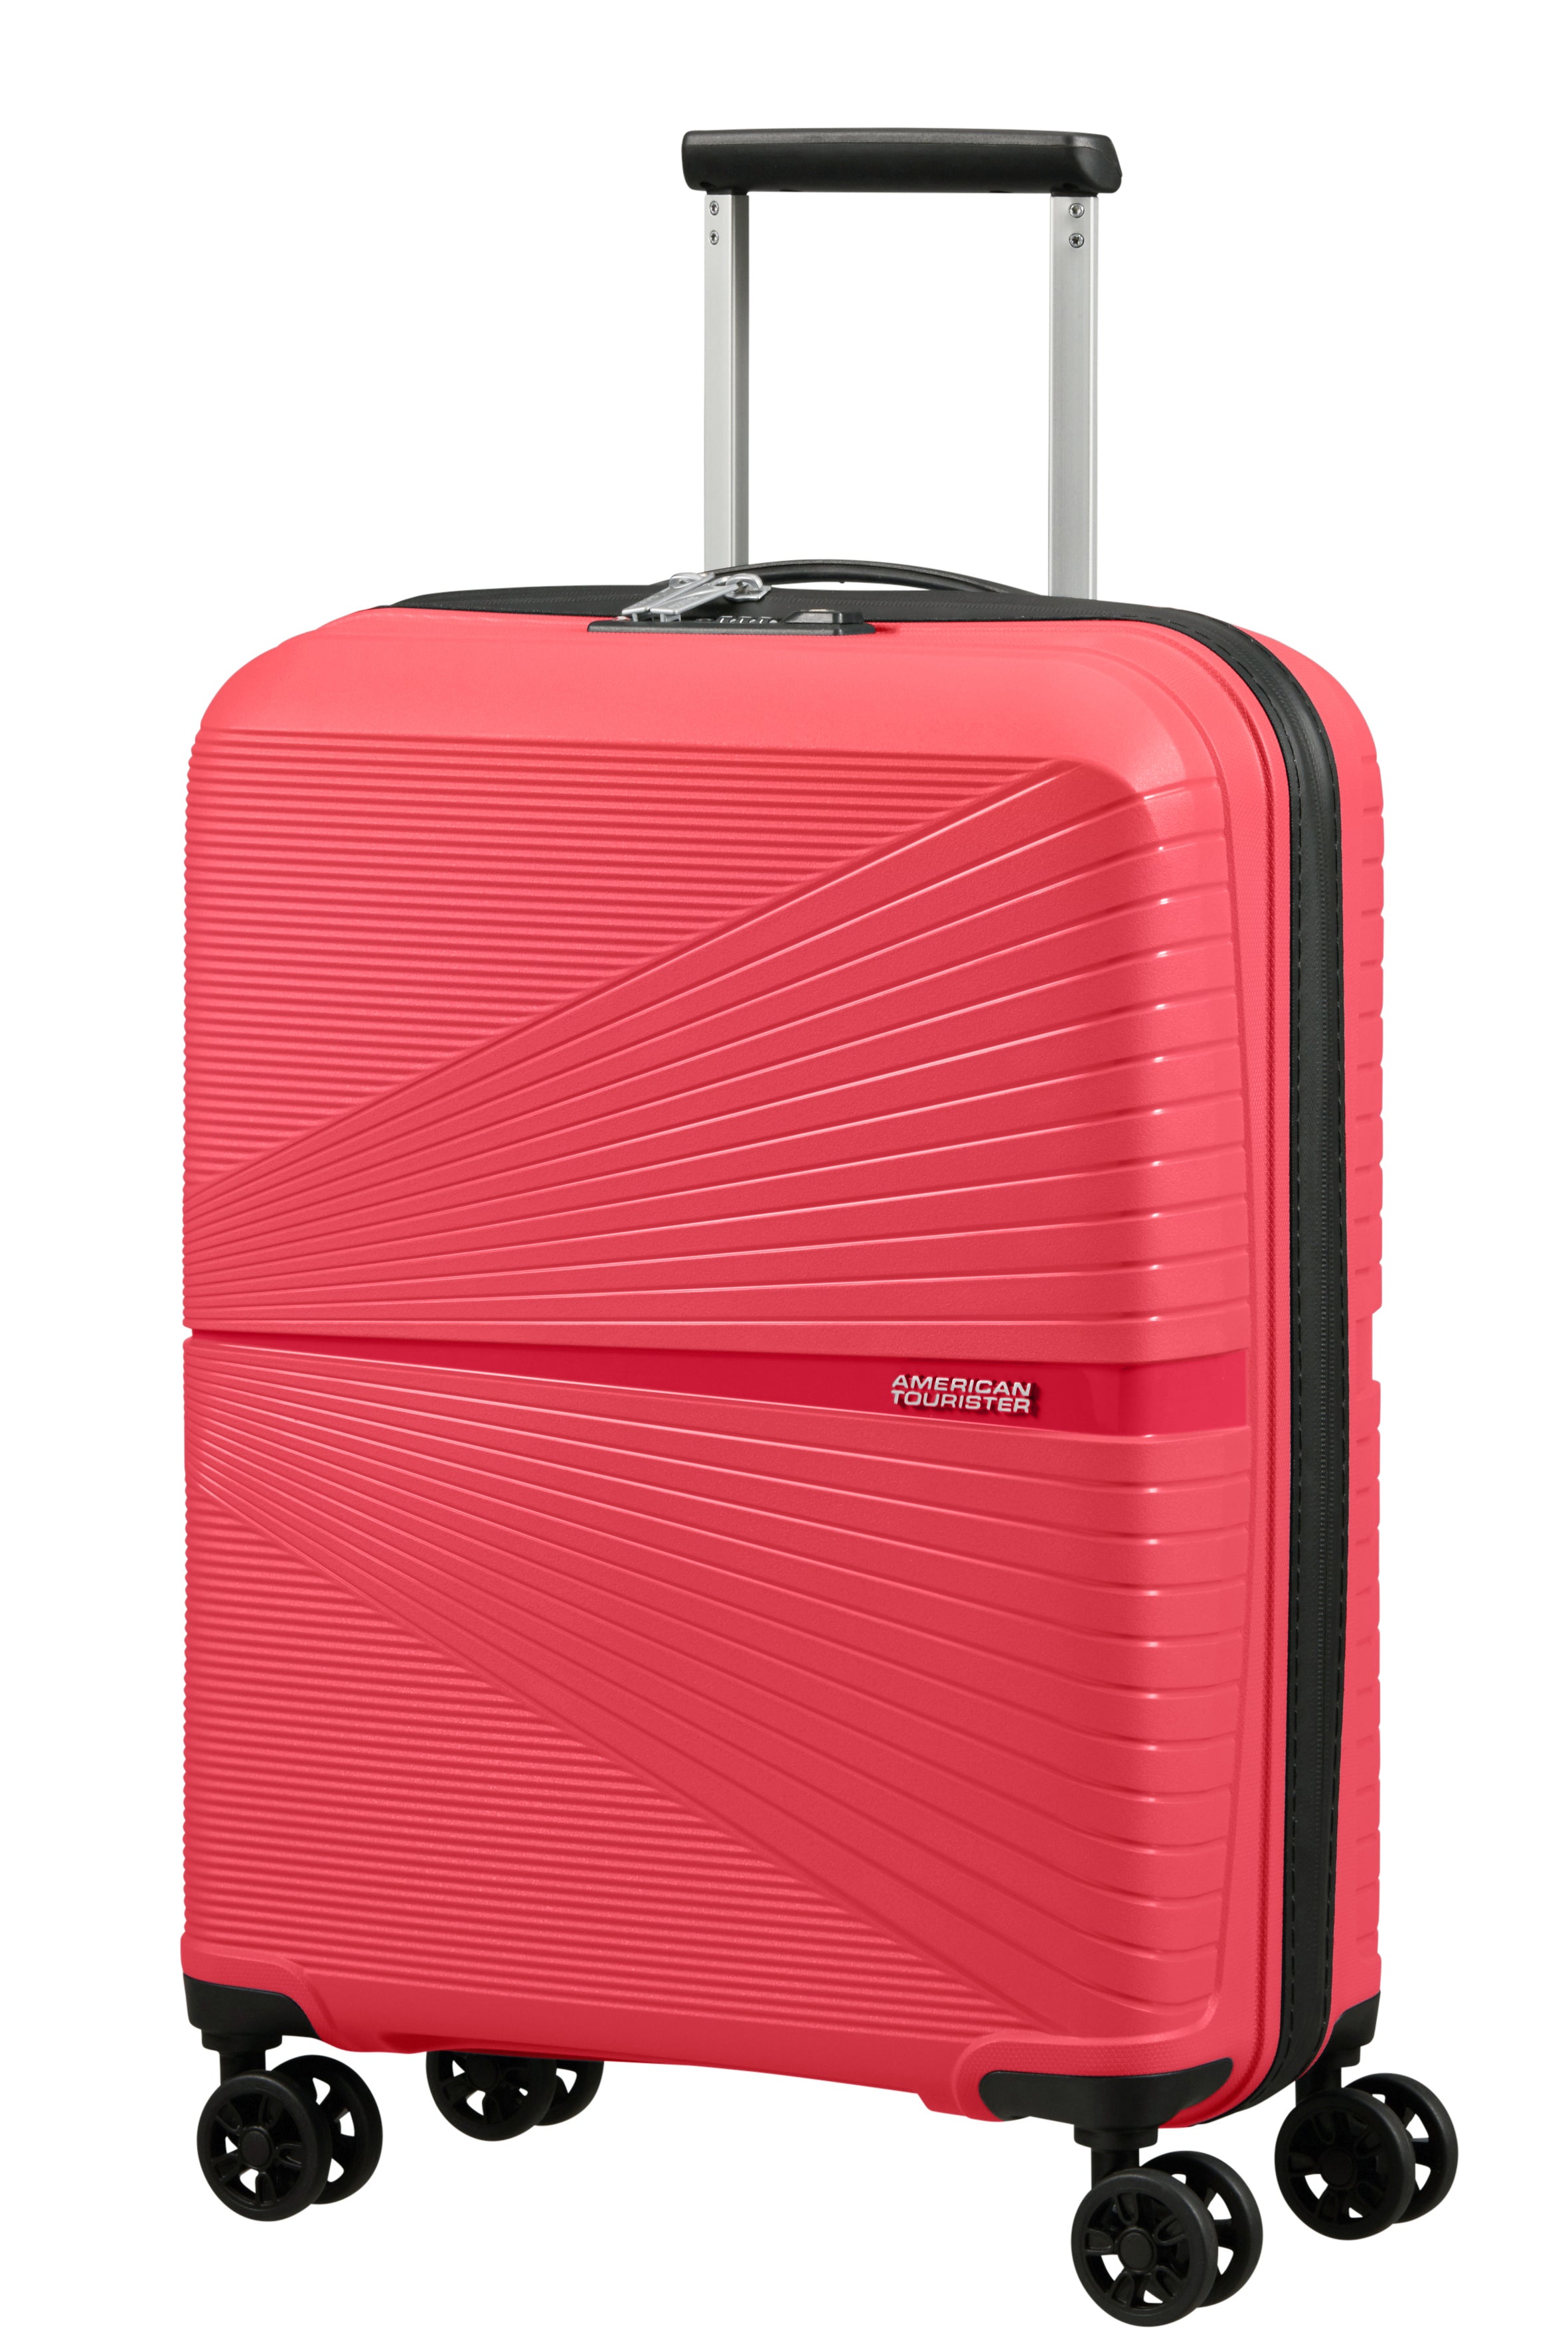 American Tourister - Airconic 55cm Small 4 Wheel Hard Suitcase - Paradise Pink-8